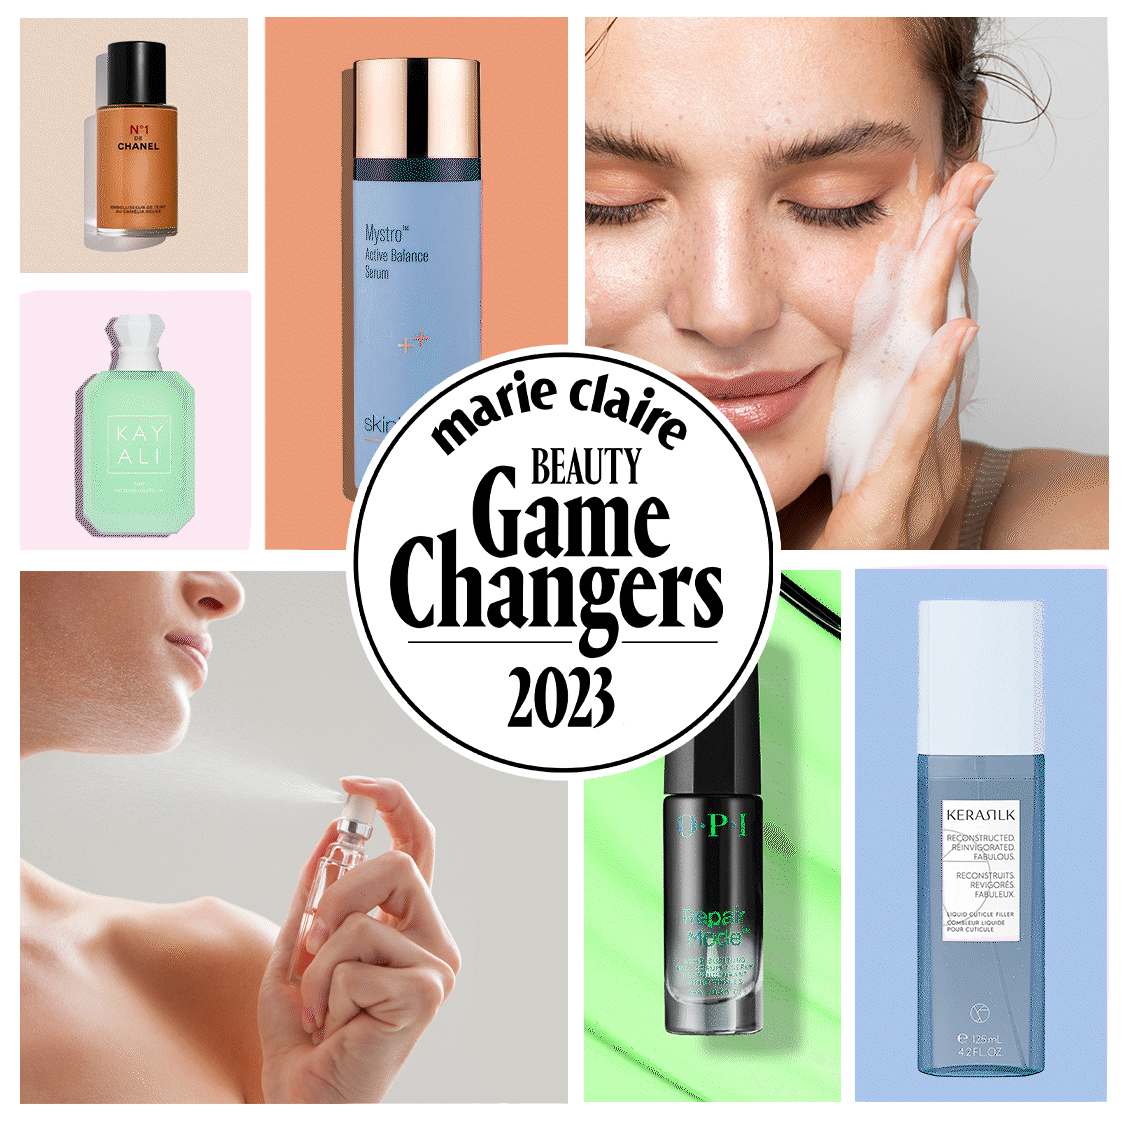 The 2023 Beauty Game-Changers Awards